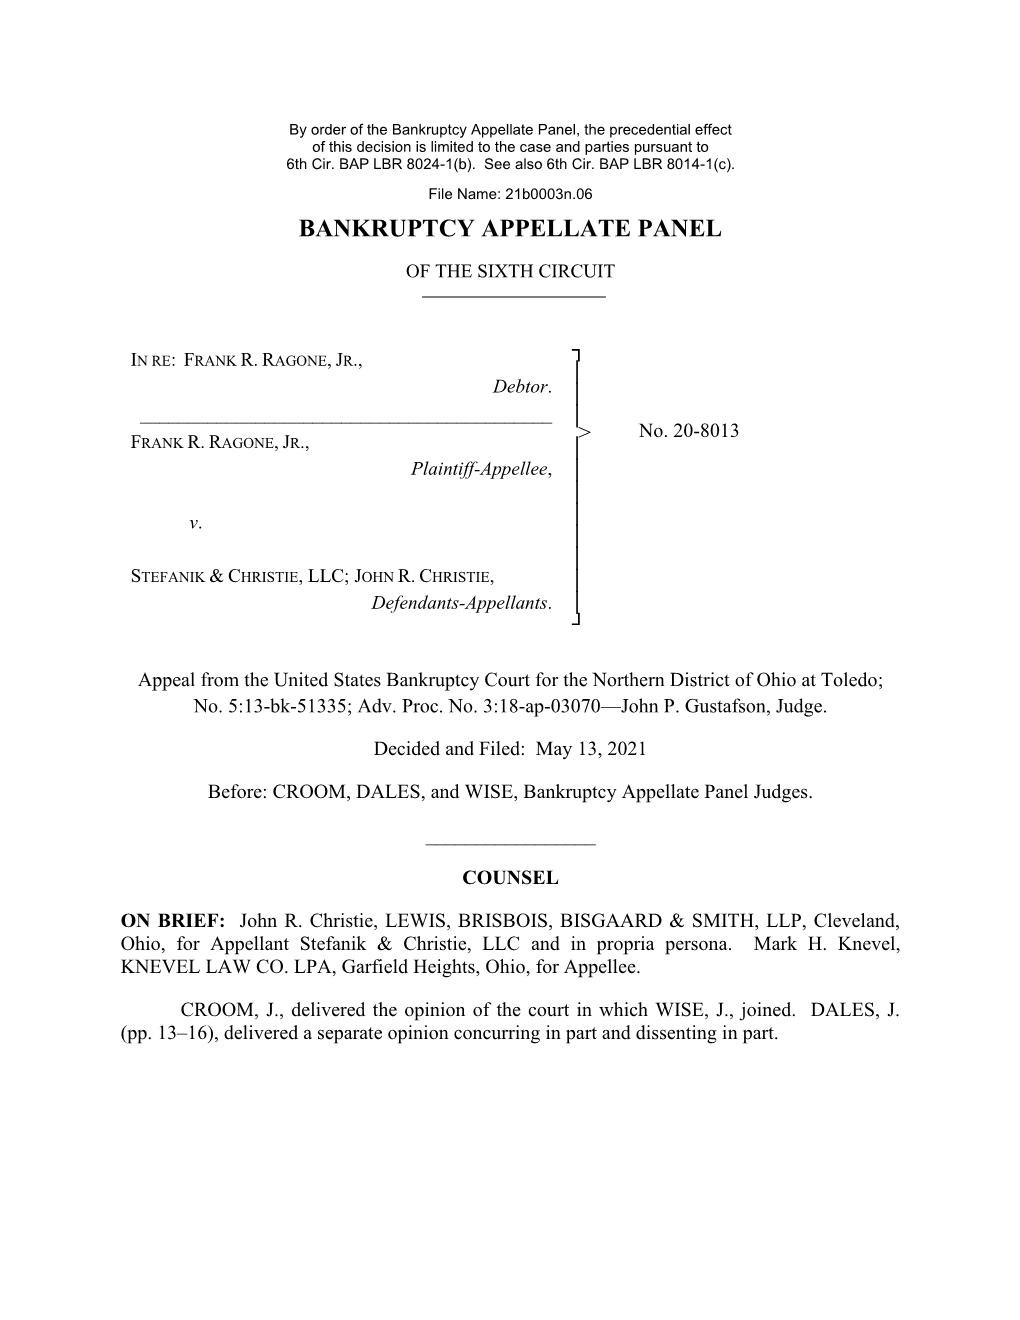 Bankruptcy Appellate Panel, the Precedential Effect of This Decision Is Limited to the Case and Parties Pursuant to 6Th Cir